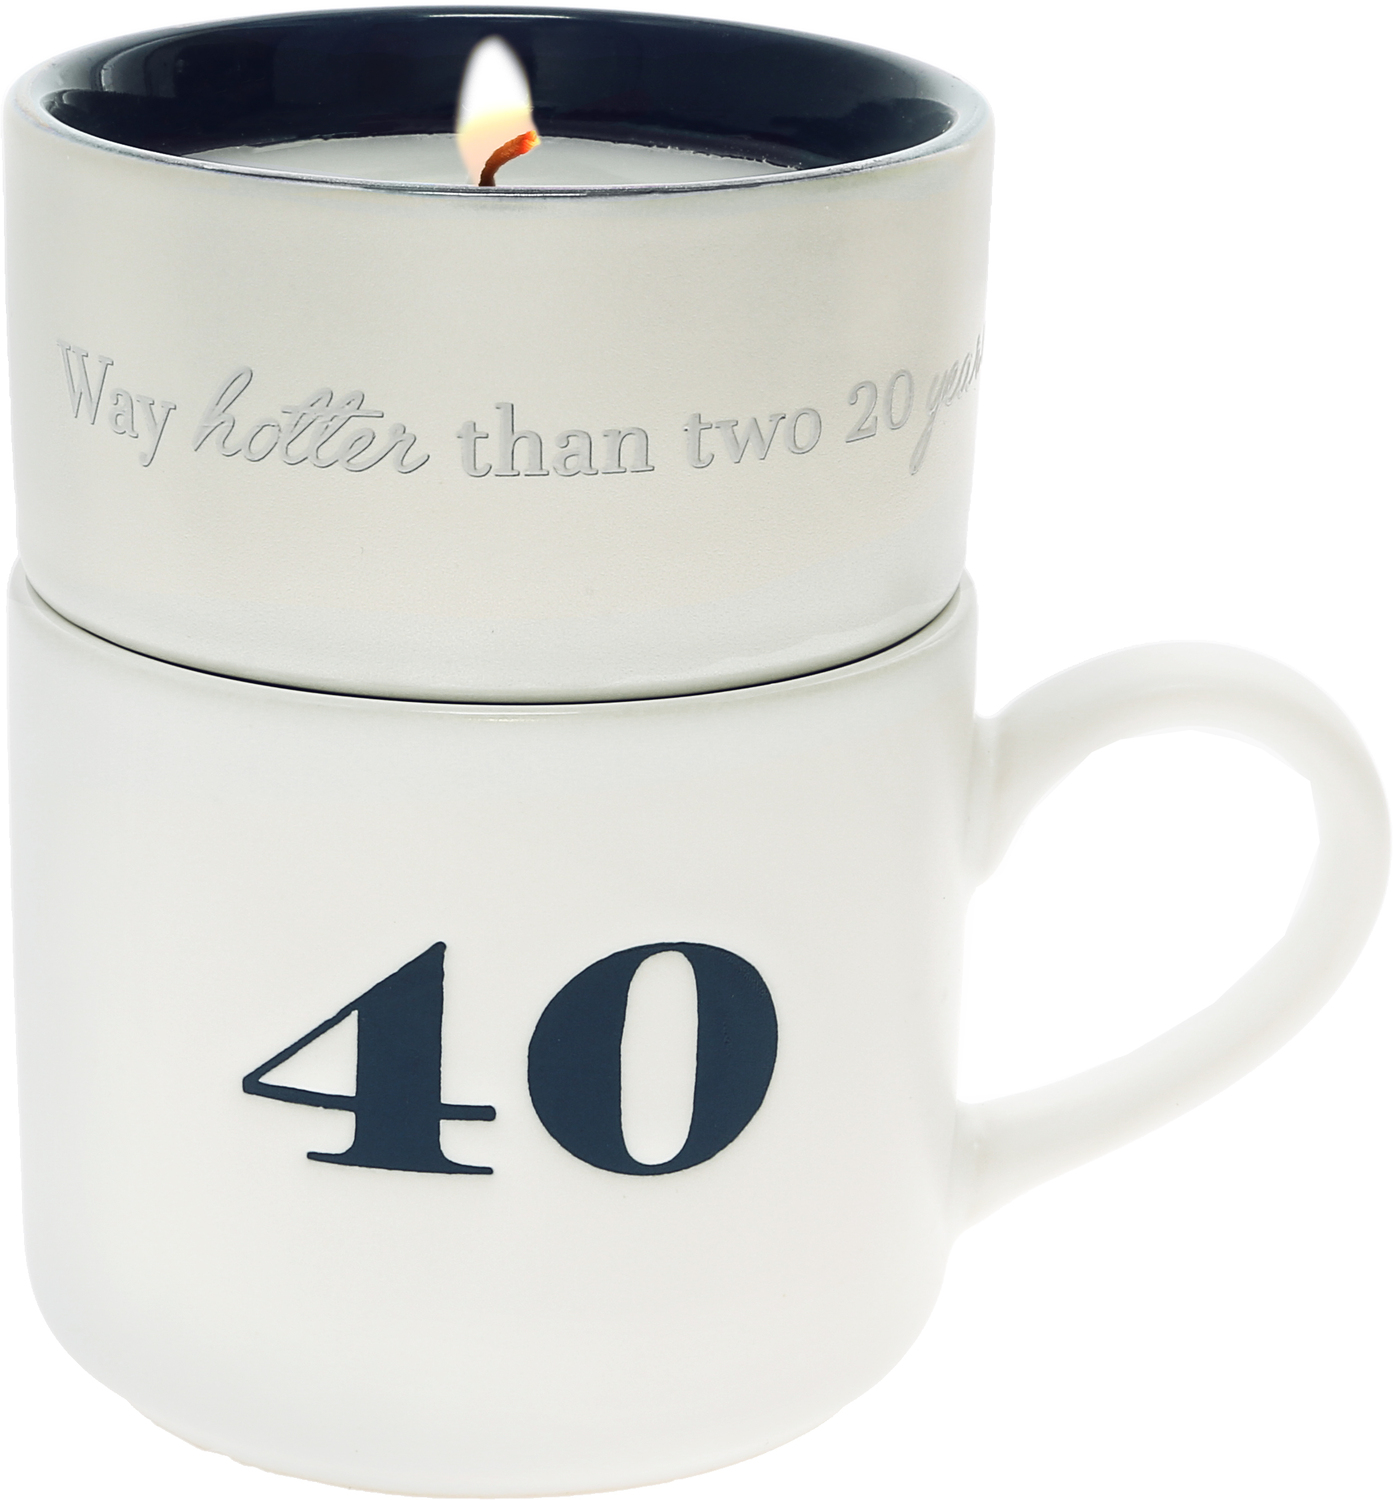 40 by Filled with Warmth - 40 - Stacking Mug and Candle Set
100% Soy Wax Scent: Tranquility